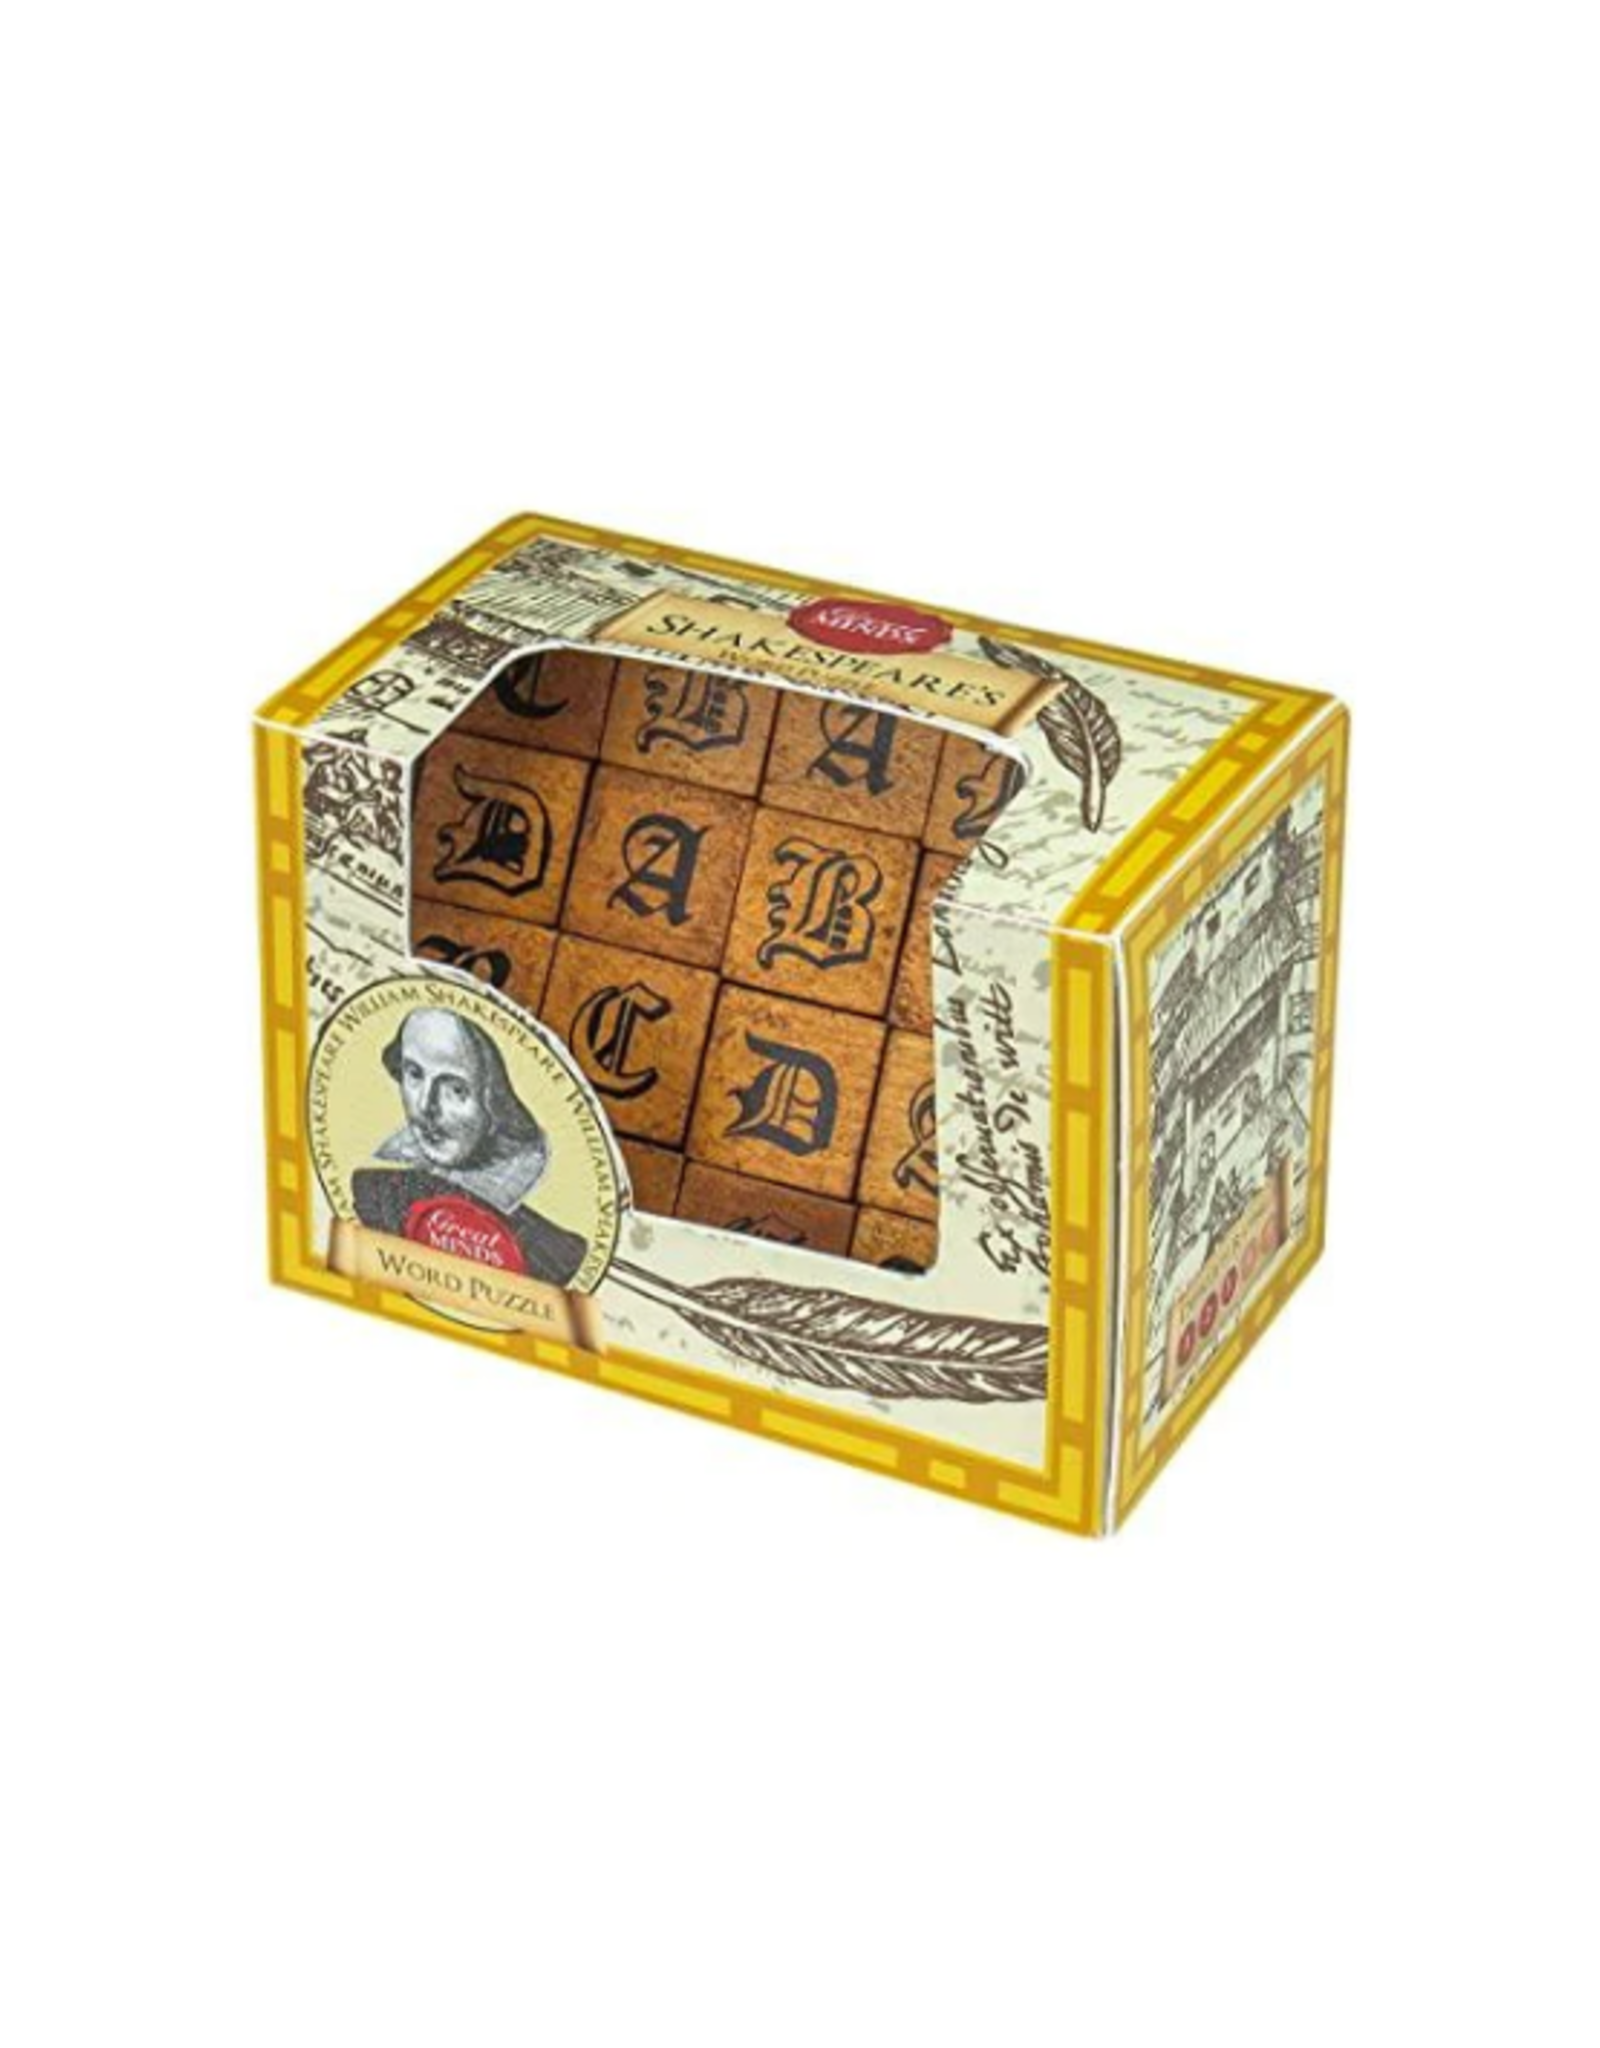 Professor Puzzle Professor Puzzle - Great Minds Metal and Wooden Puzzles - Shakespeare's Word Puzzle